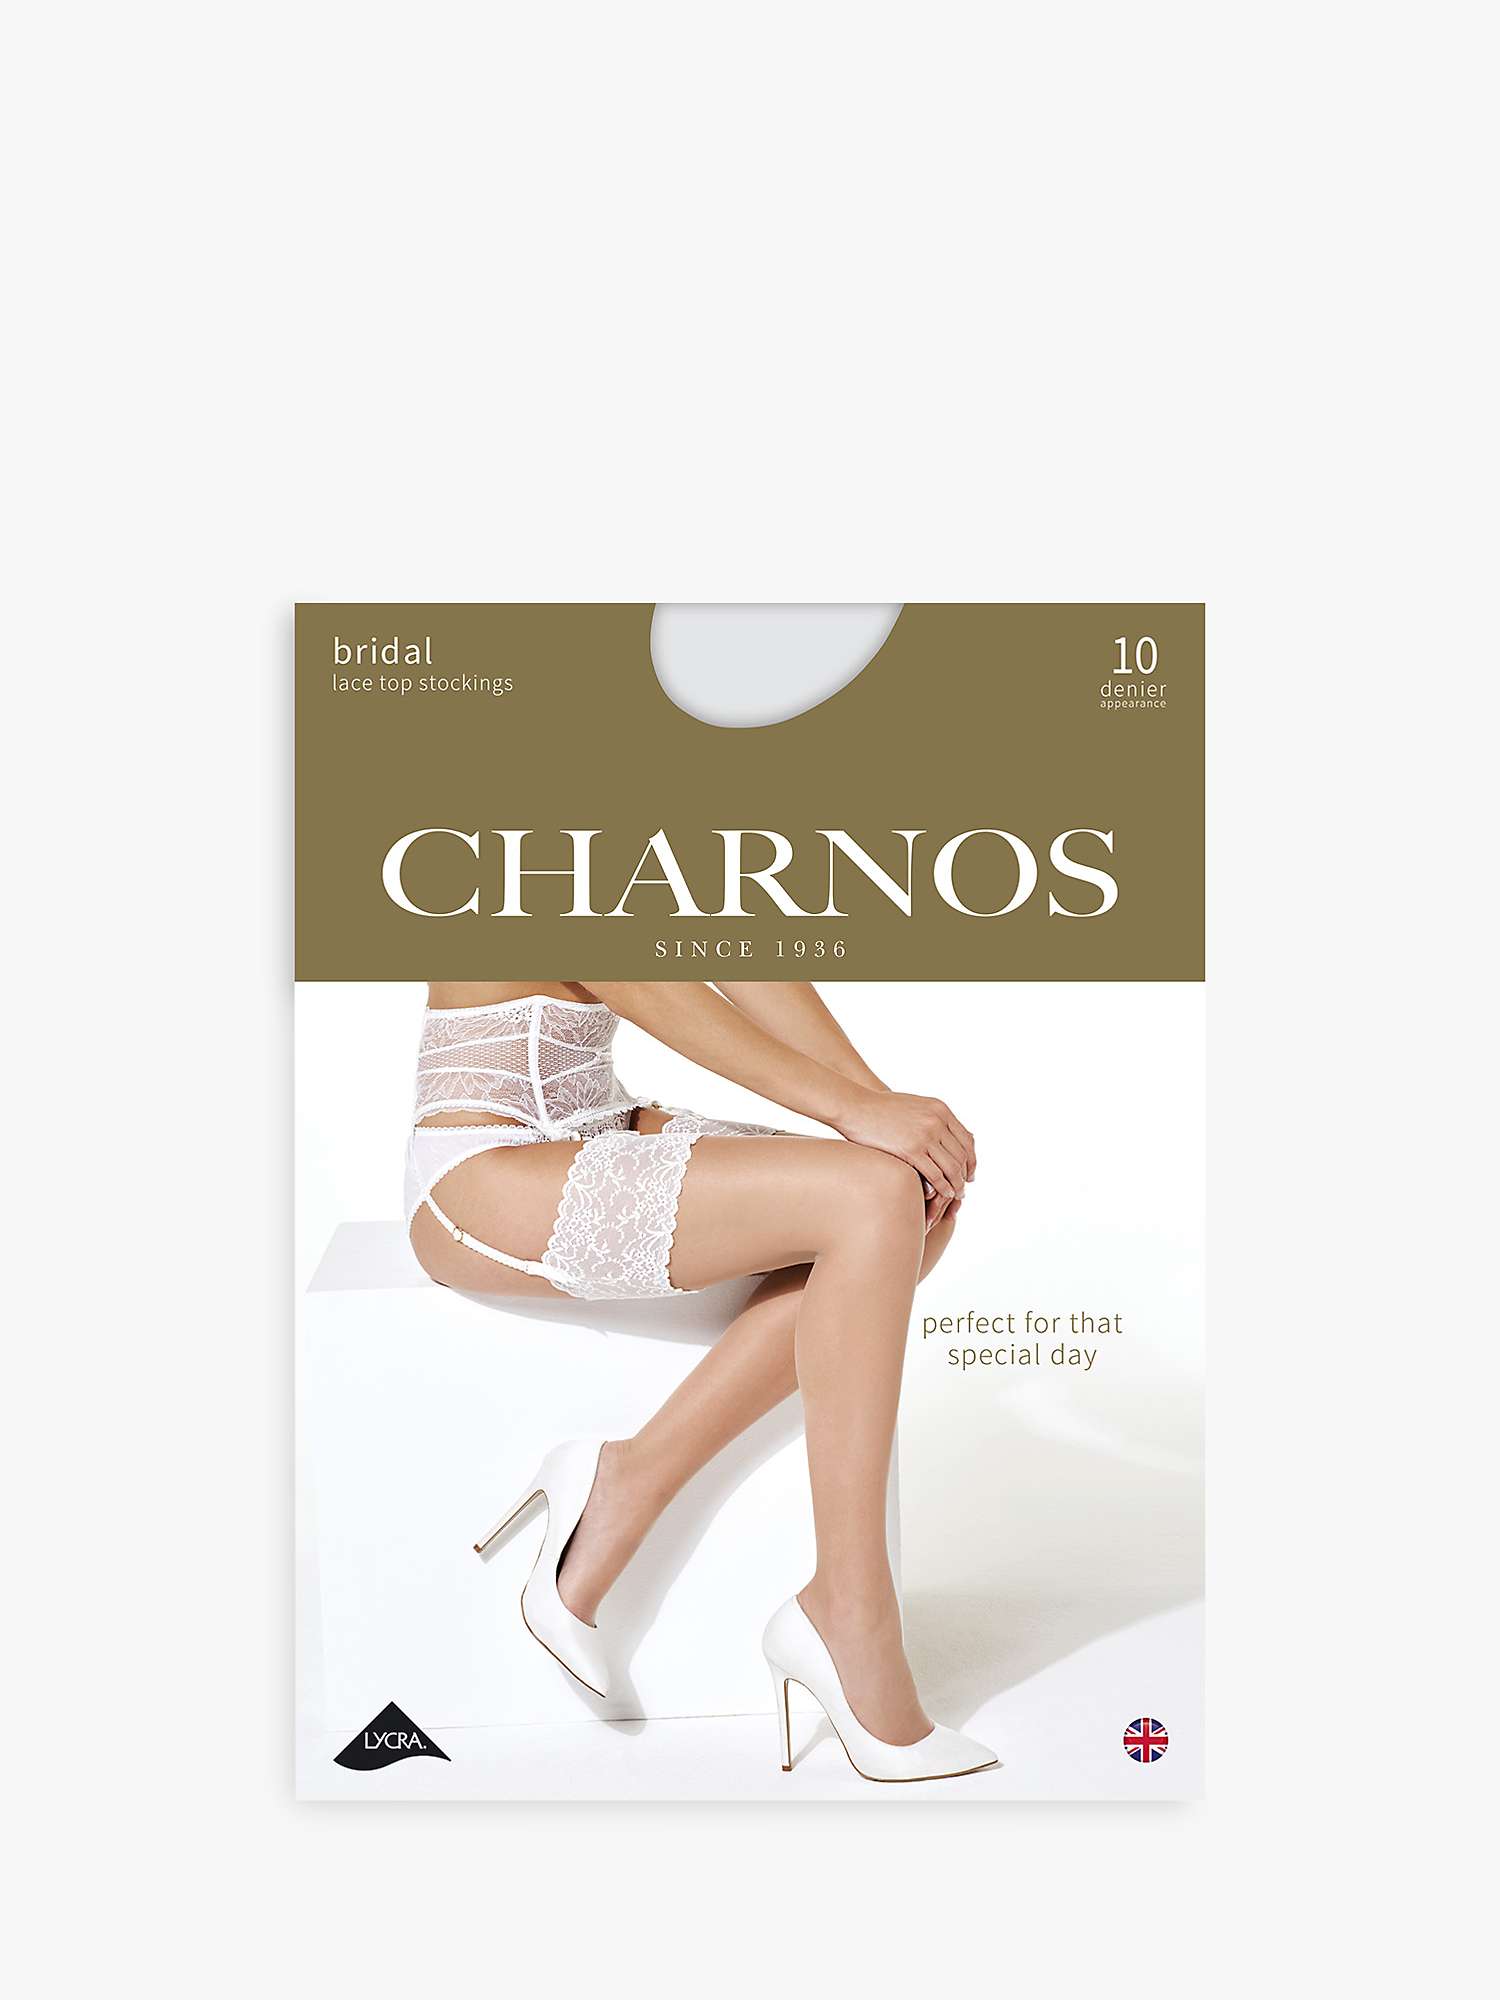 Buy Charnos 10 Denier Bridal Lace Stockings Online at johnlewis.com